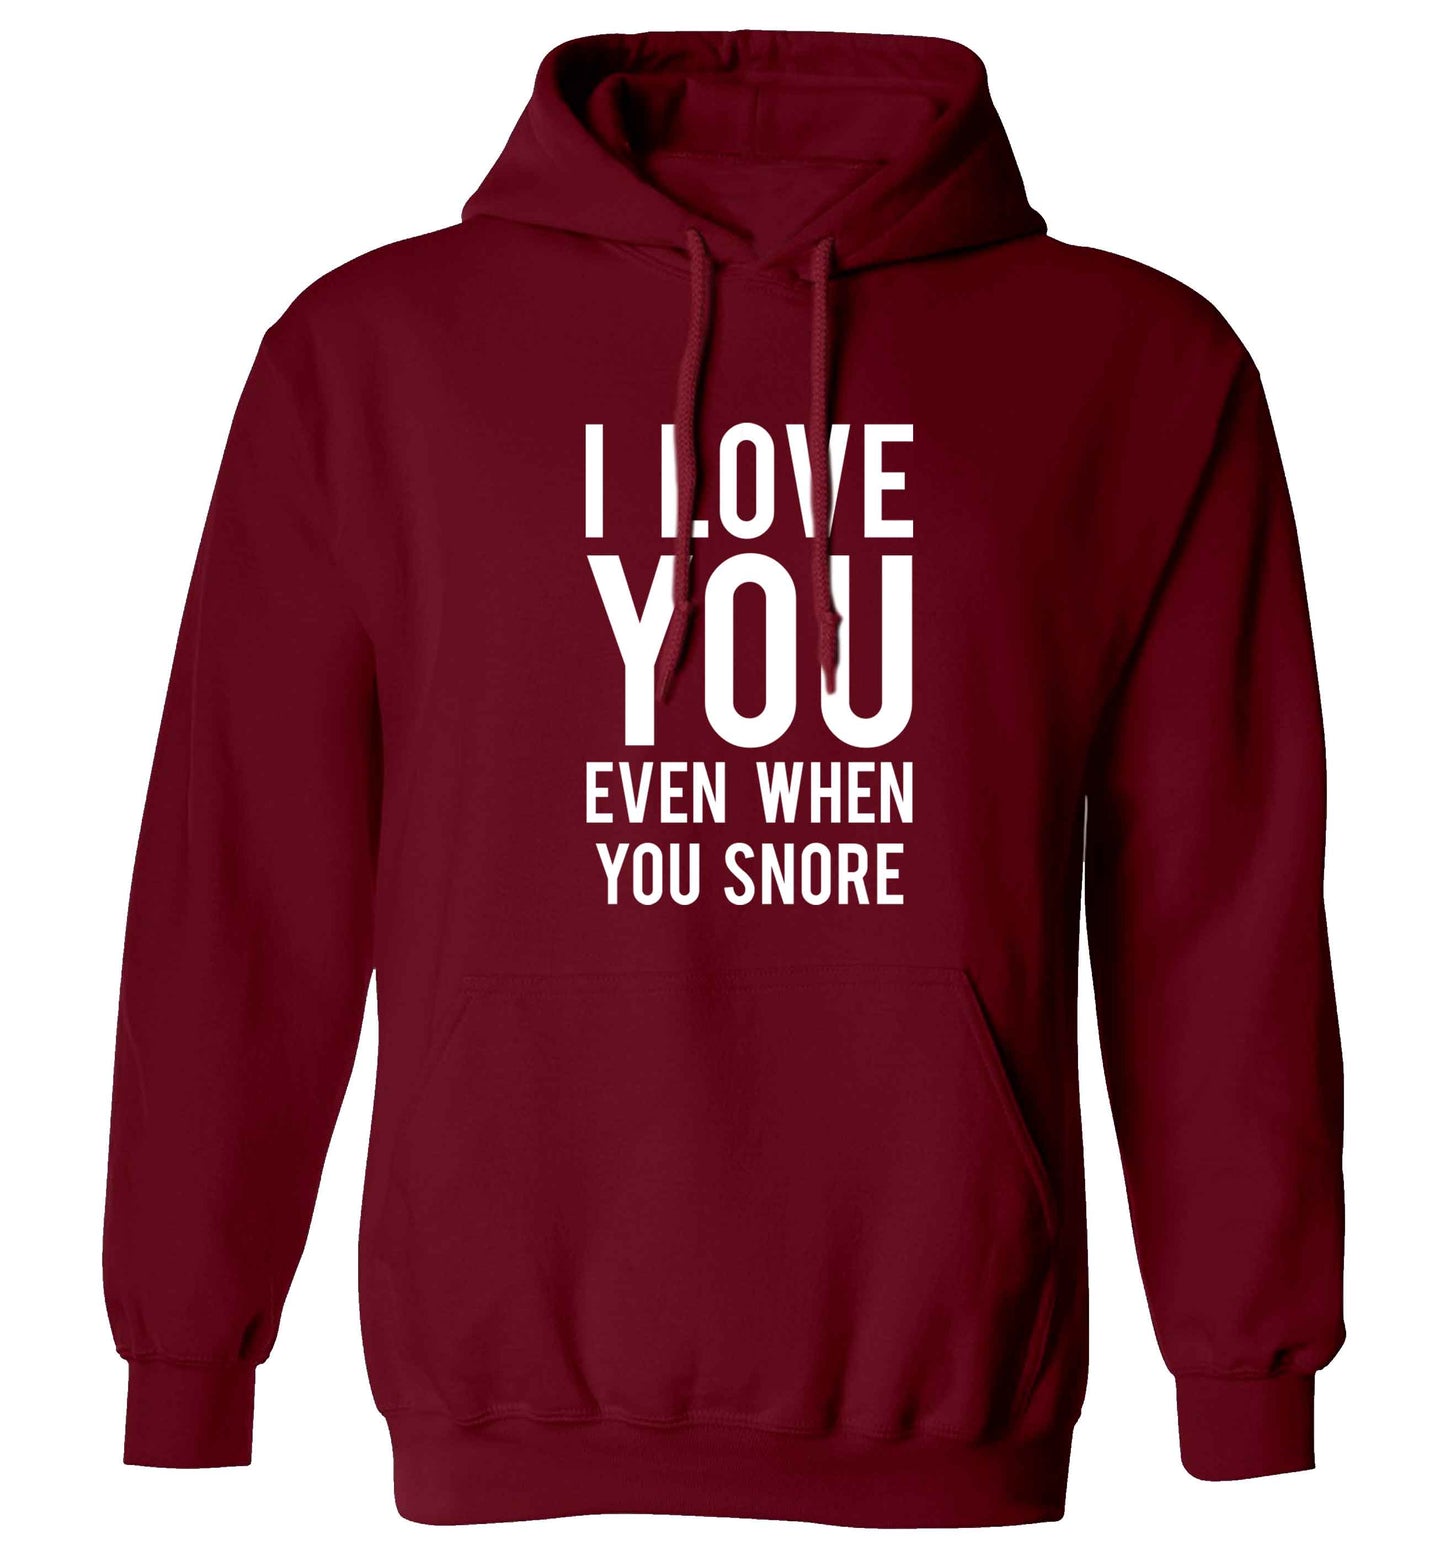 I love you even when you snore adults unisex maroon hoodie 2XL